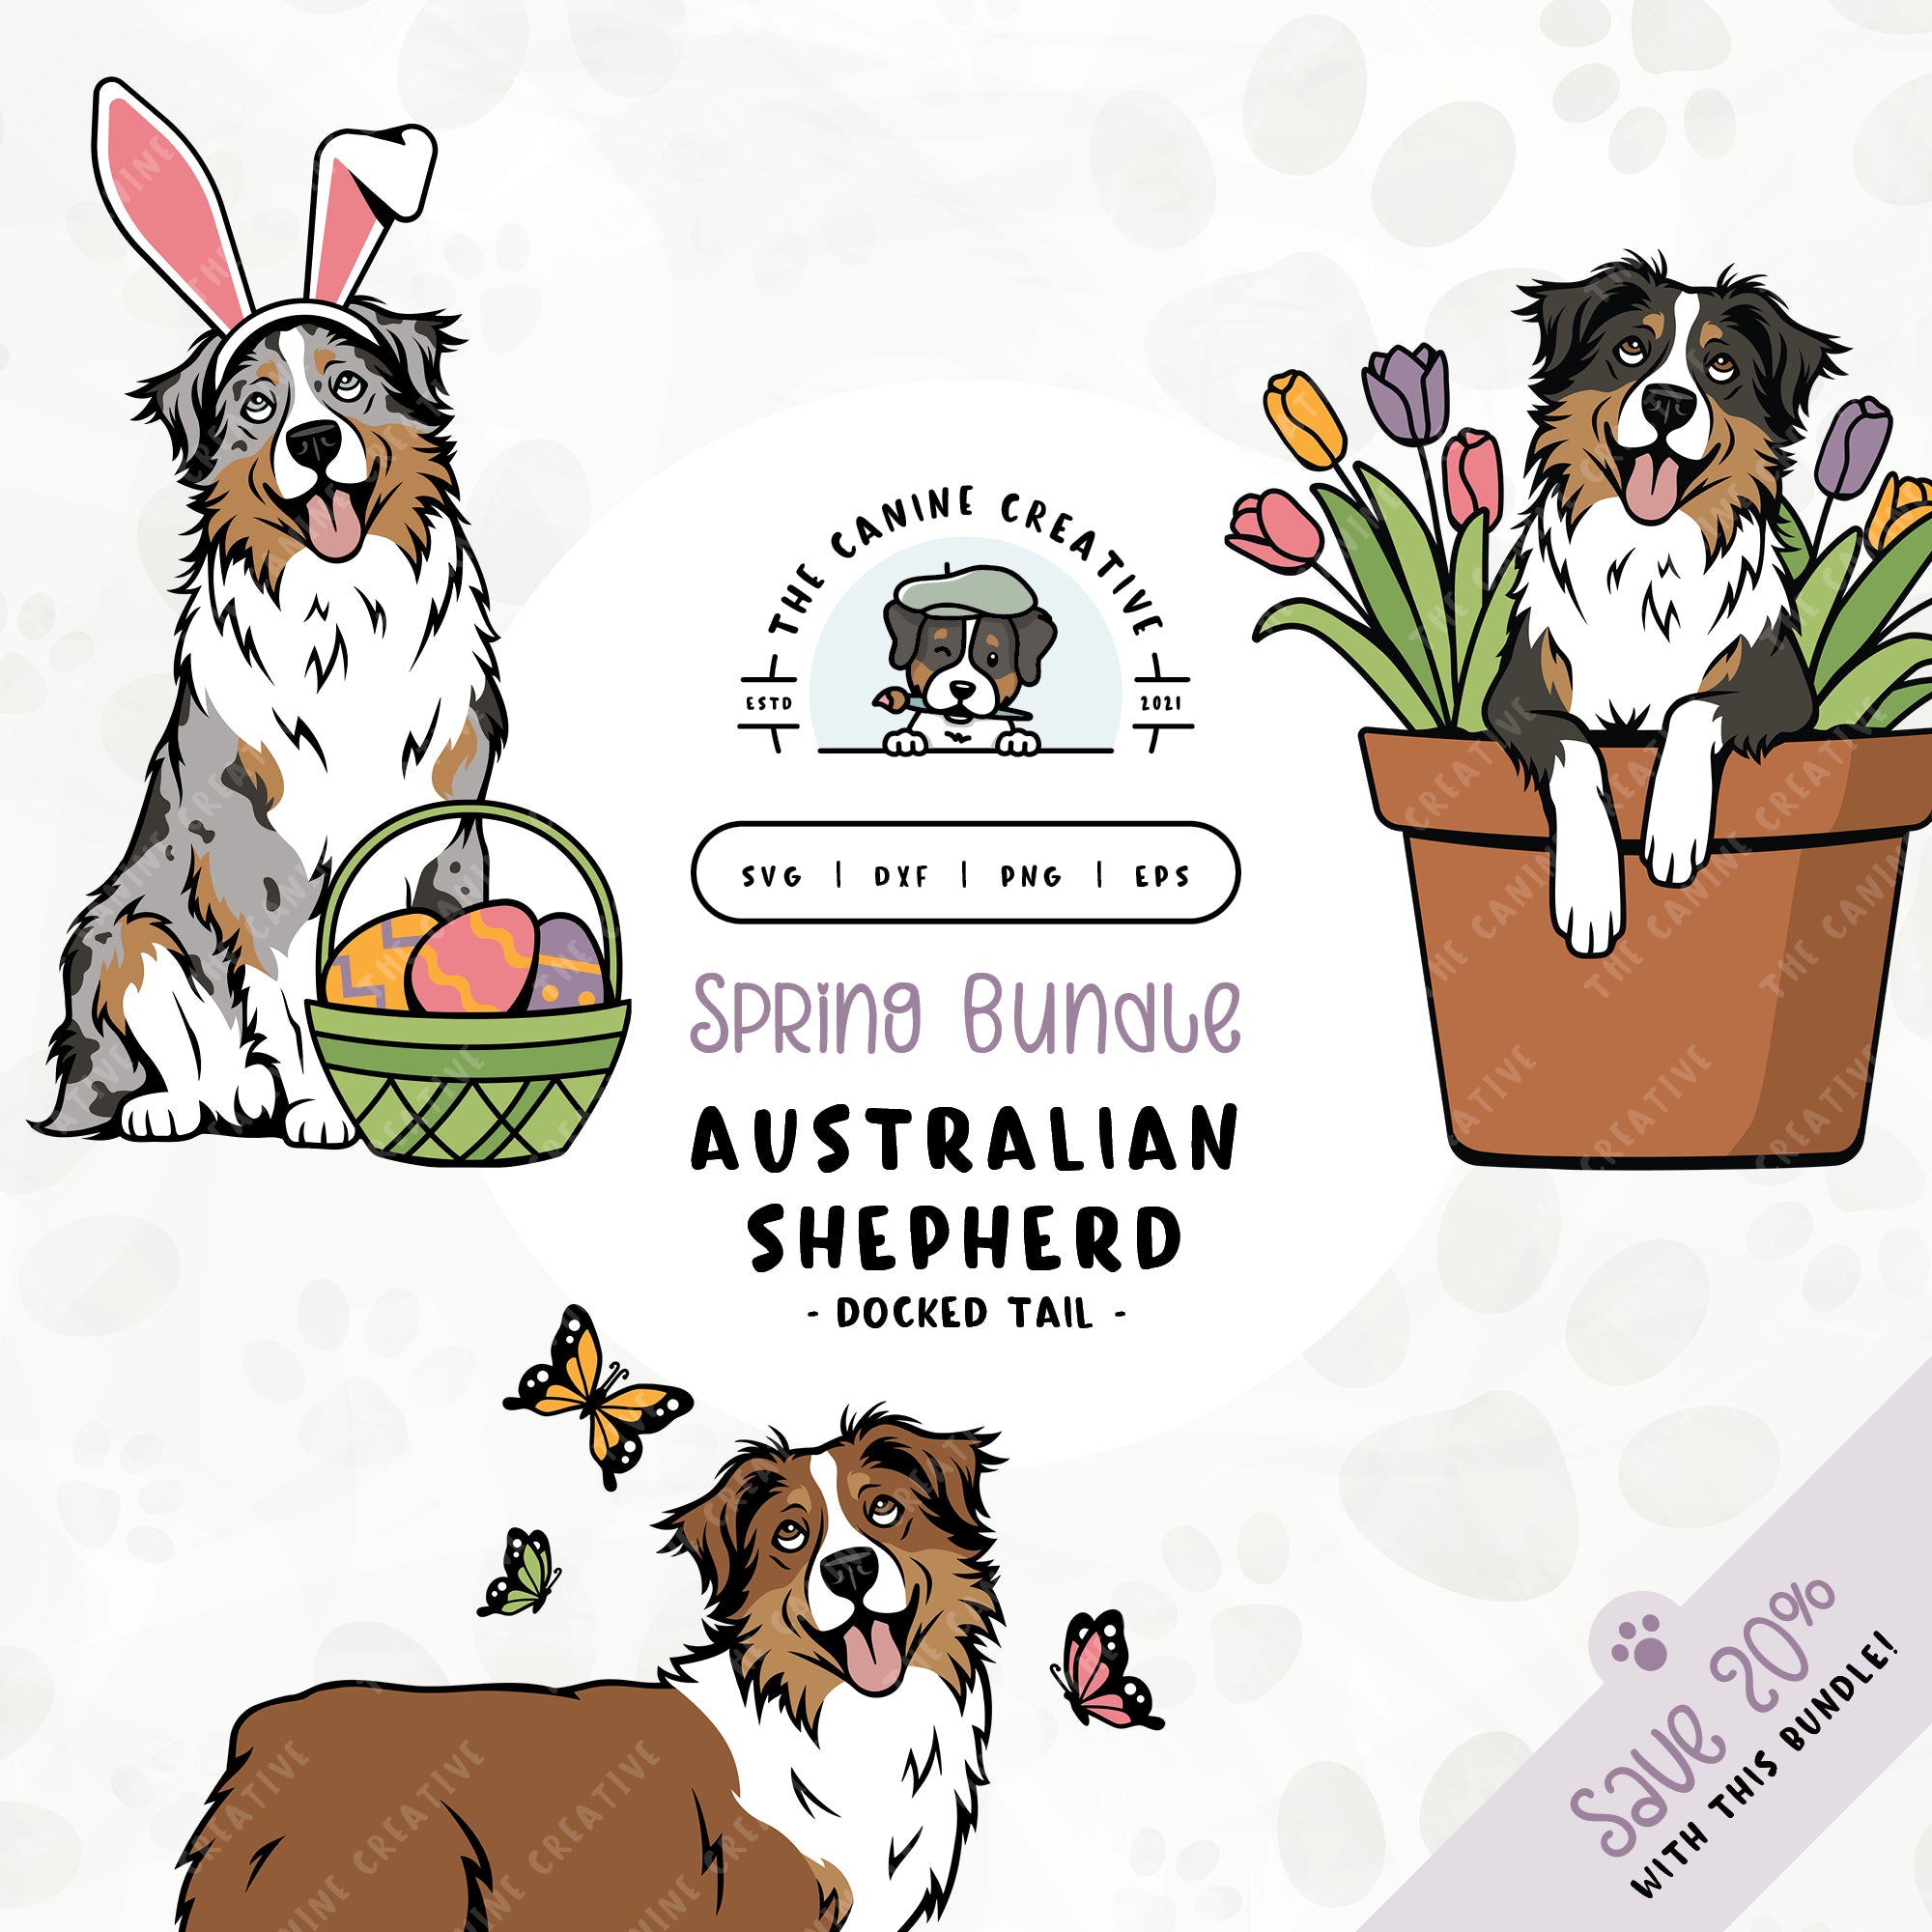 This 3-pack springtime illustration bundle features docked tail Australian Shepherds among colorful butterflies, peeking out from a pot of vibrant tulips, and wearing festive bunny ears while sitting near a basket of brightly-colored Easter eggs. File formats include: SVG, DXF, PNG, and EPS.